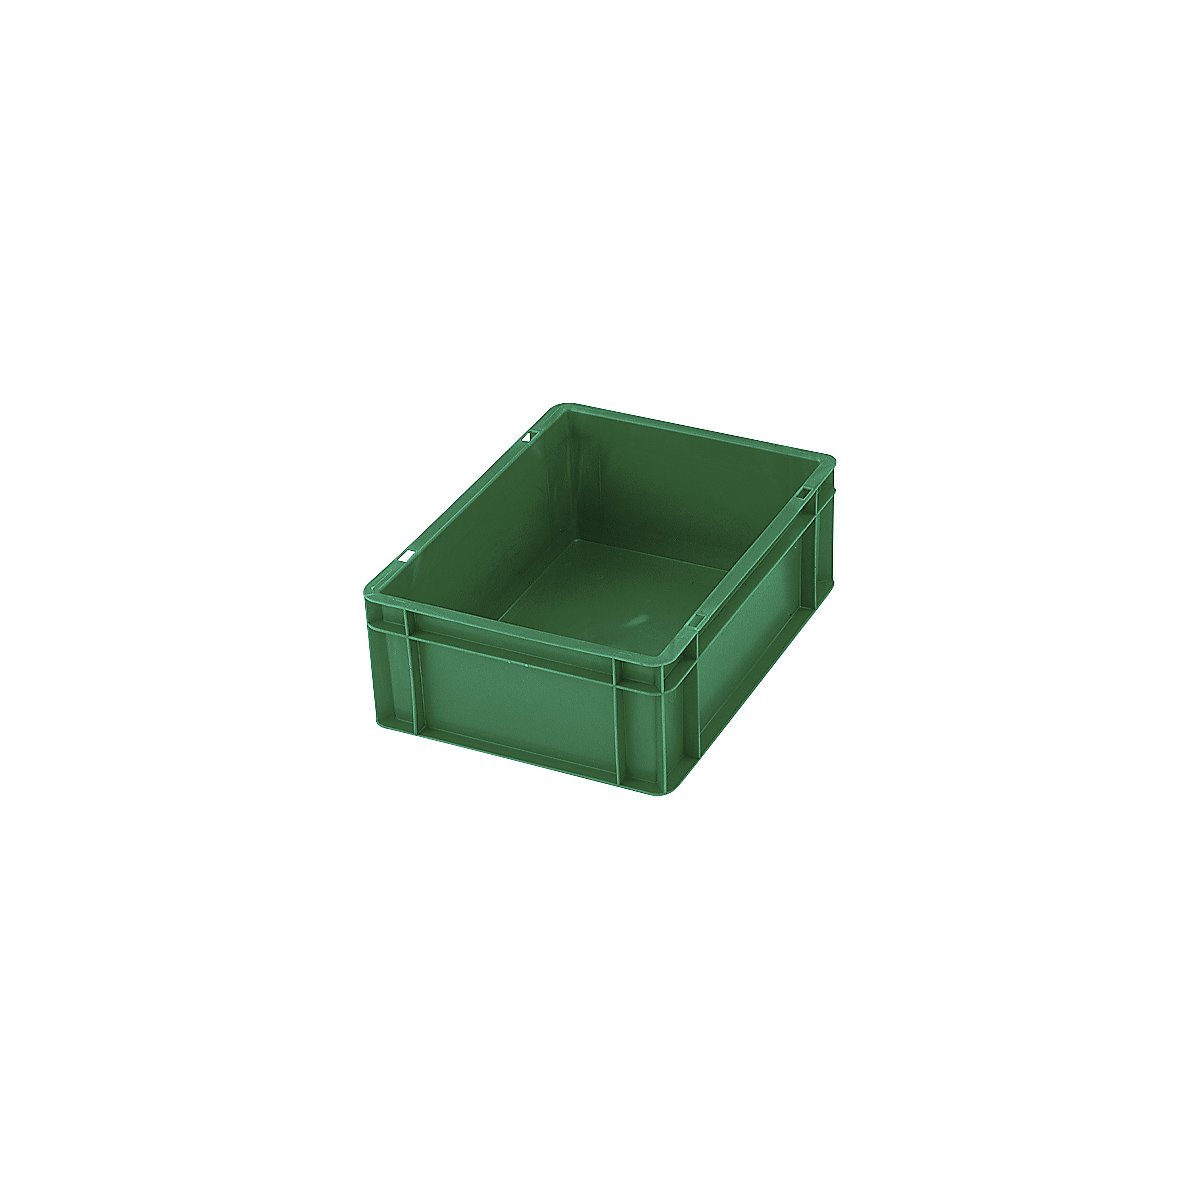 Euro stacking container, closed walls and base, LxWxH 400 x 300 x 50 mm, green, pack of 5-3